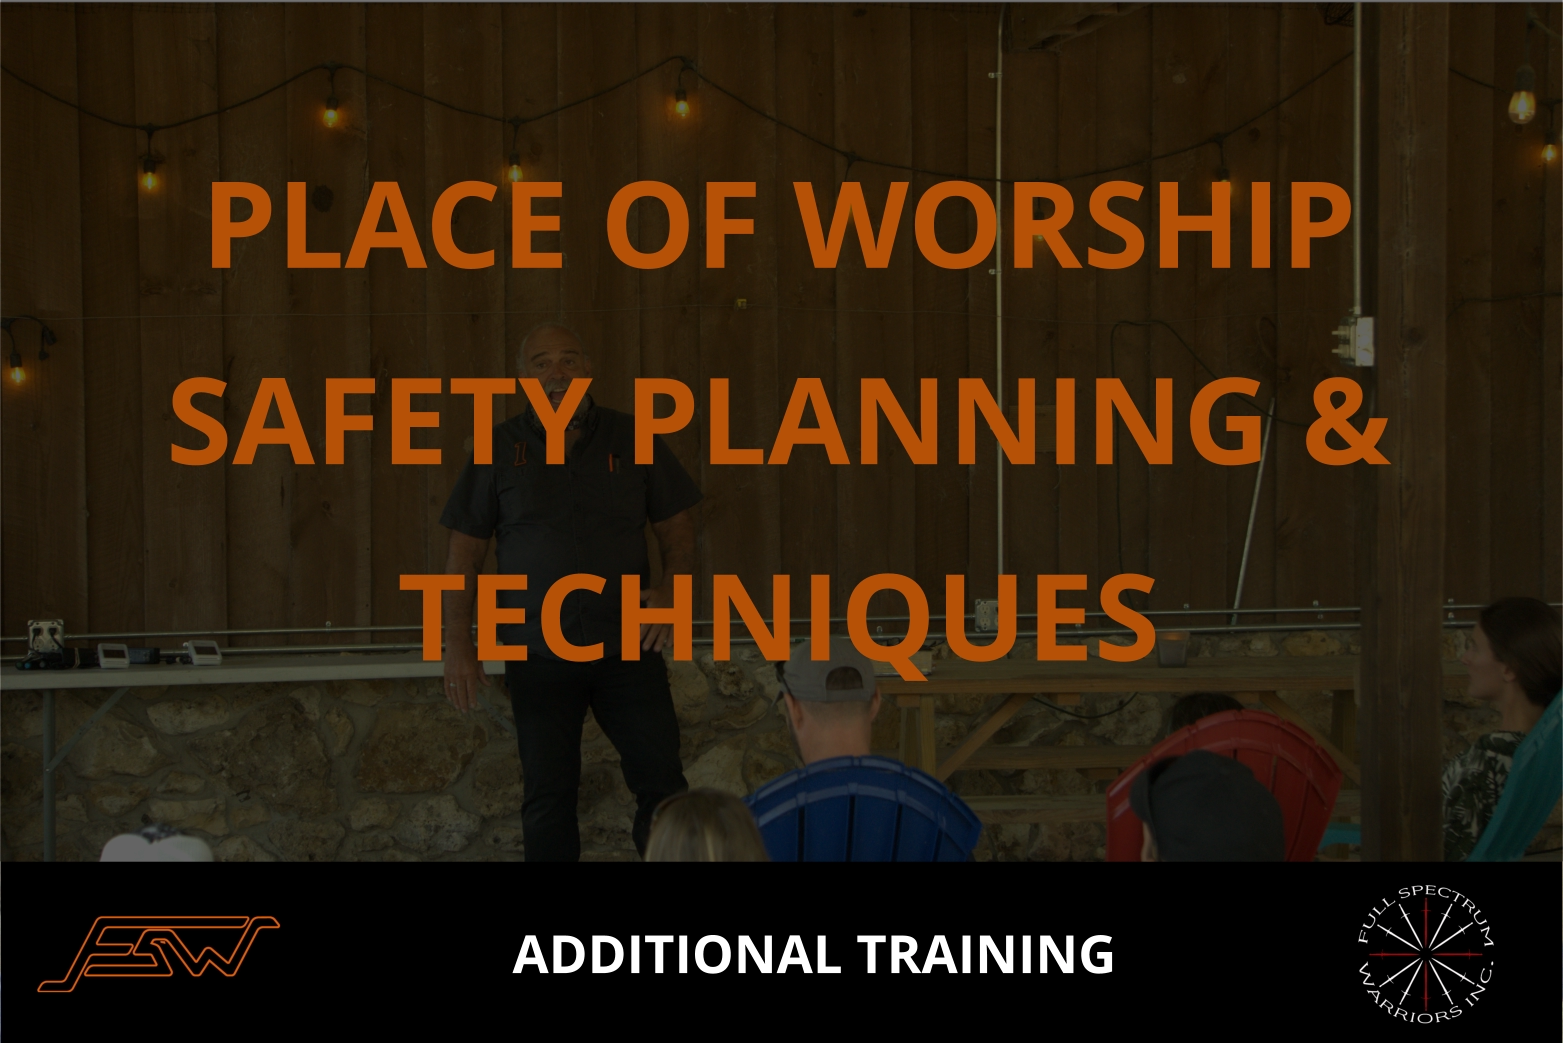 PLACE OF WORSHIP SAFETY PLANNING & TECHNIQUES